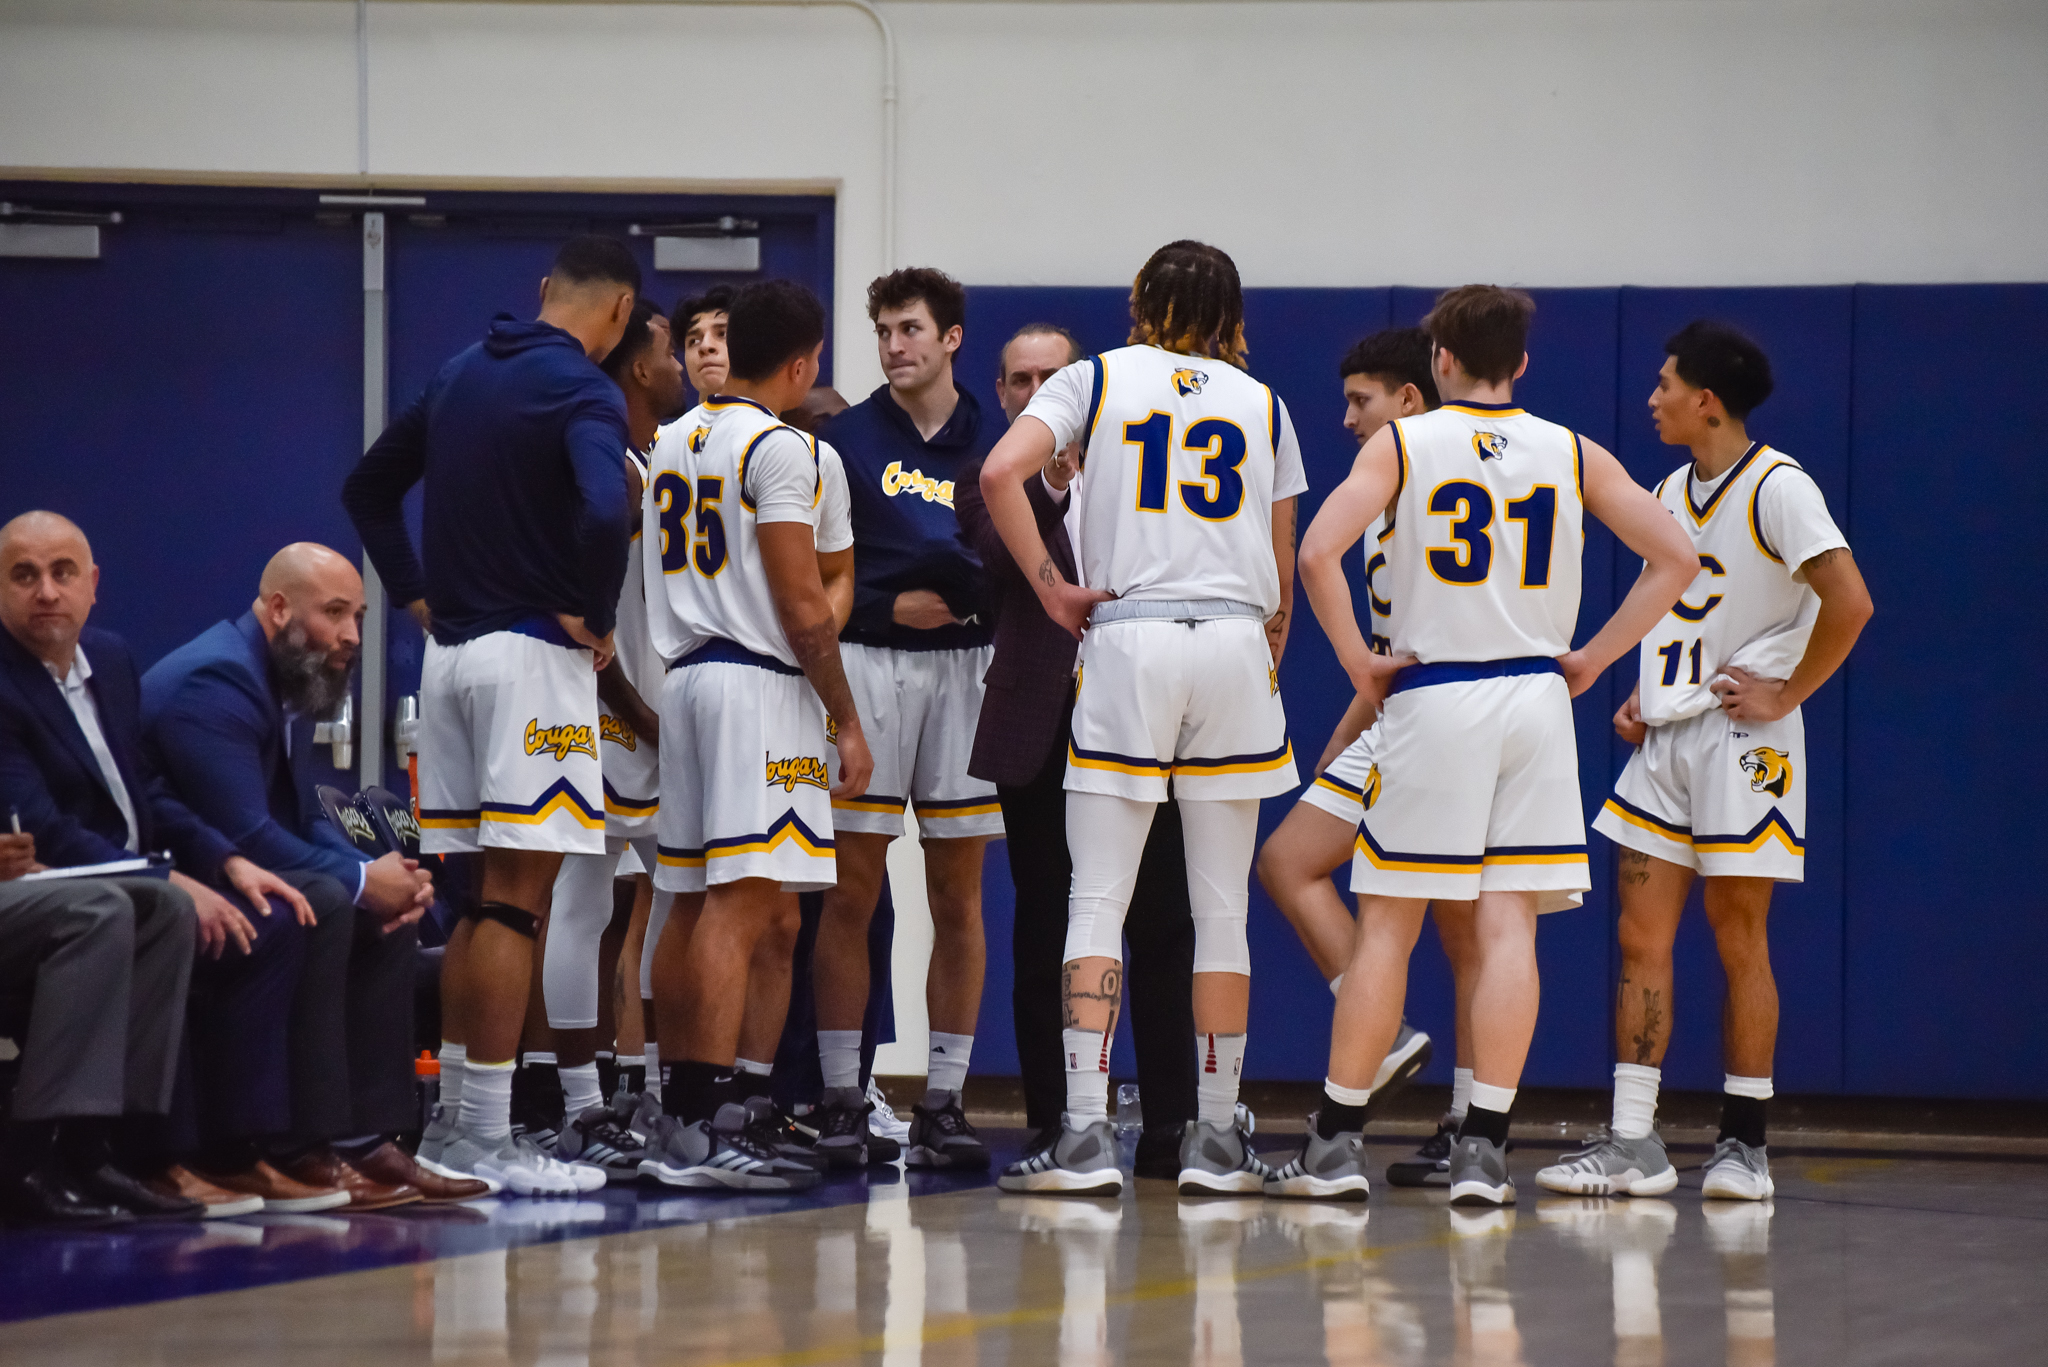 College of the Canyons men's basketball stock image of players huddled together on the sidelines.